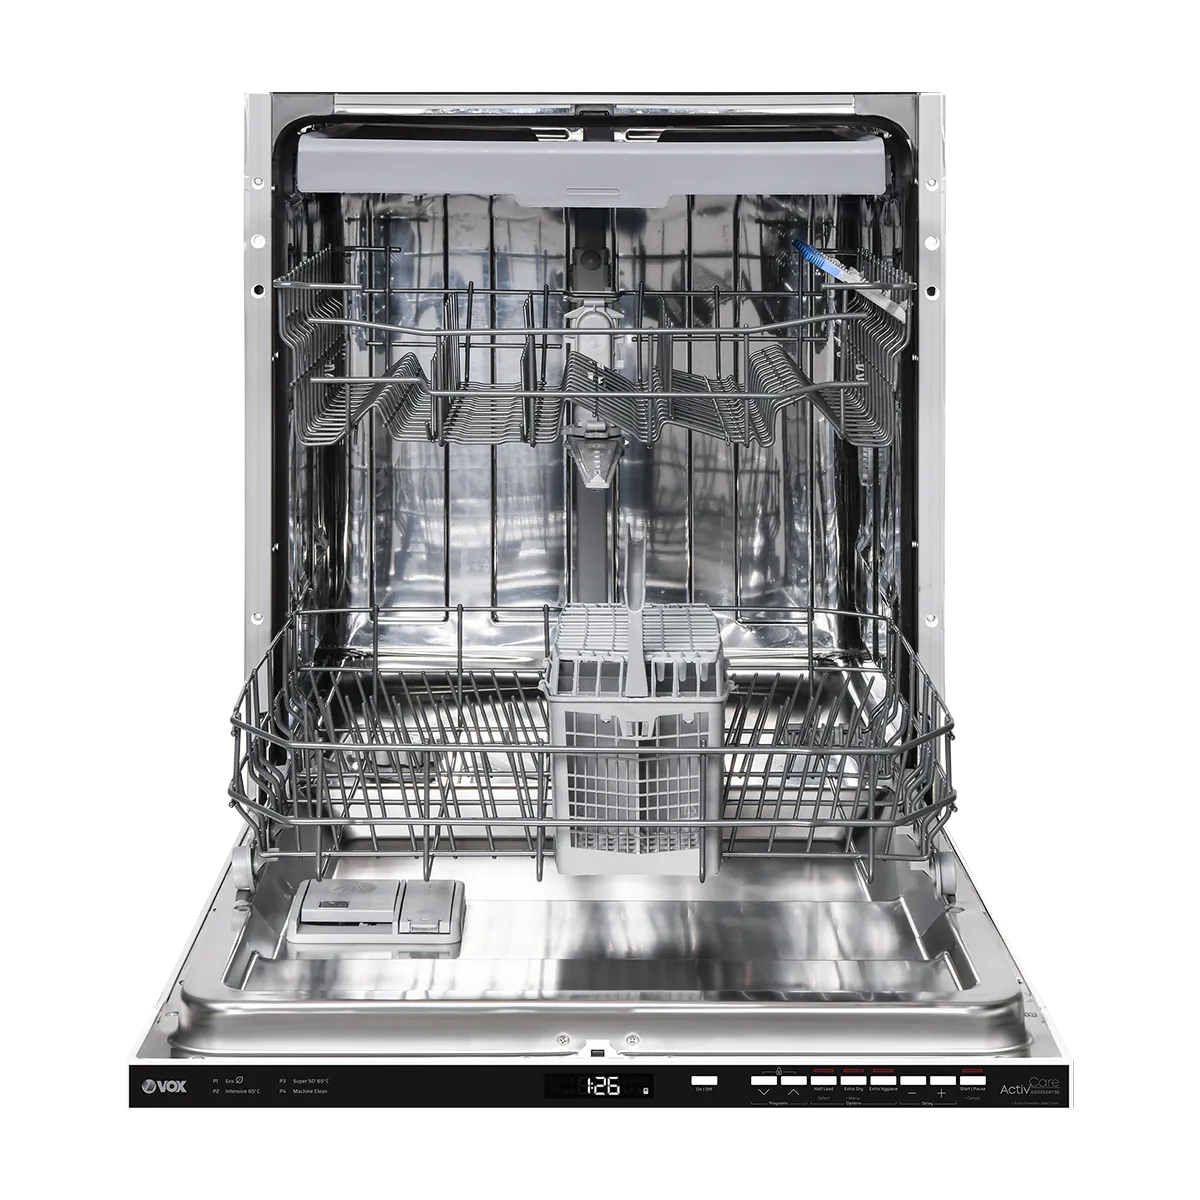 Built-in dishwasher GSI 13S24 Y3E 